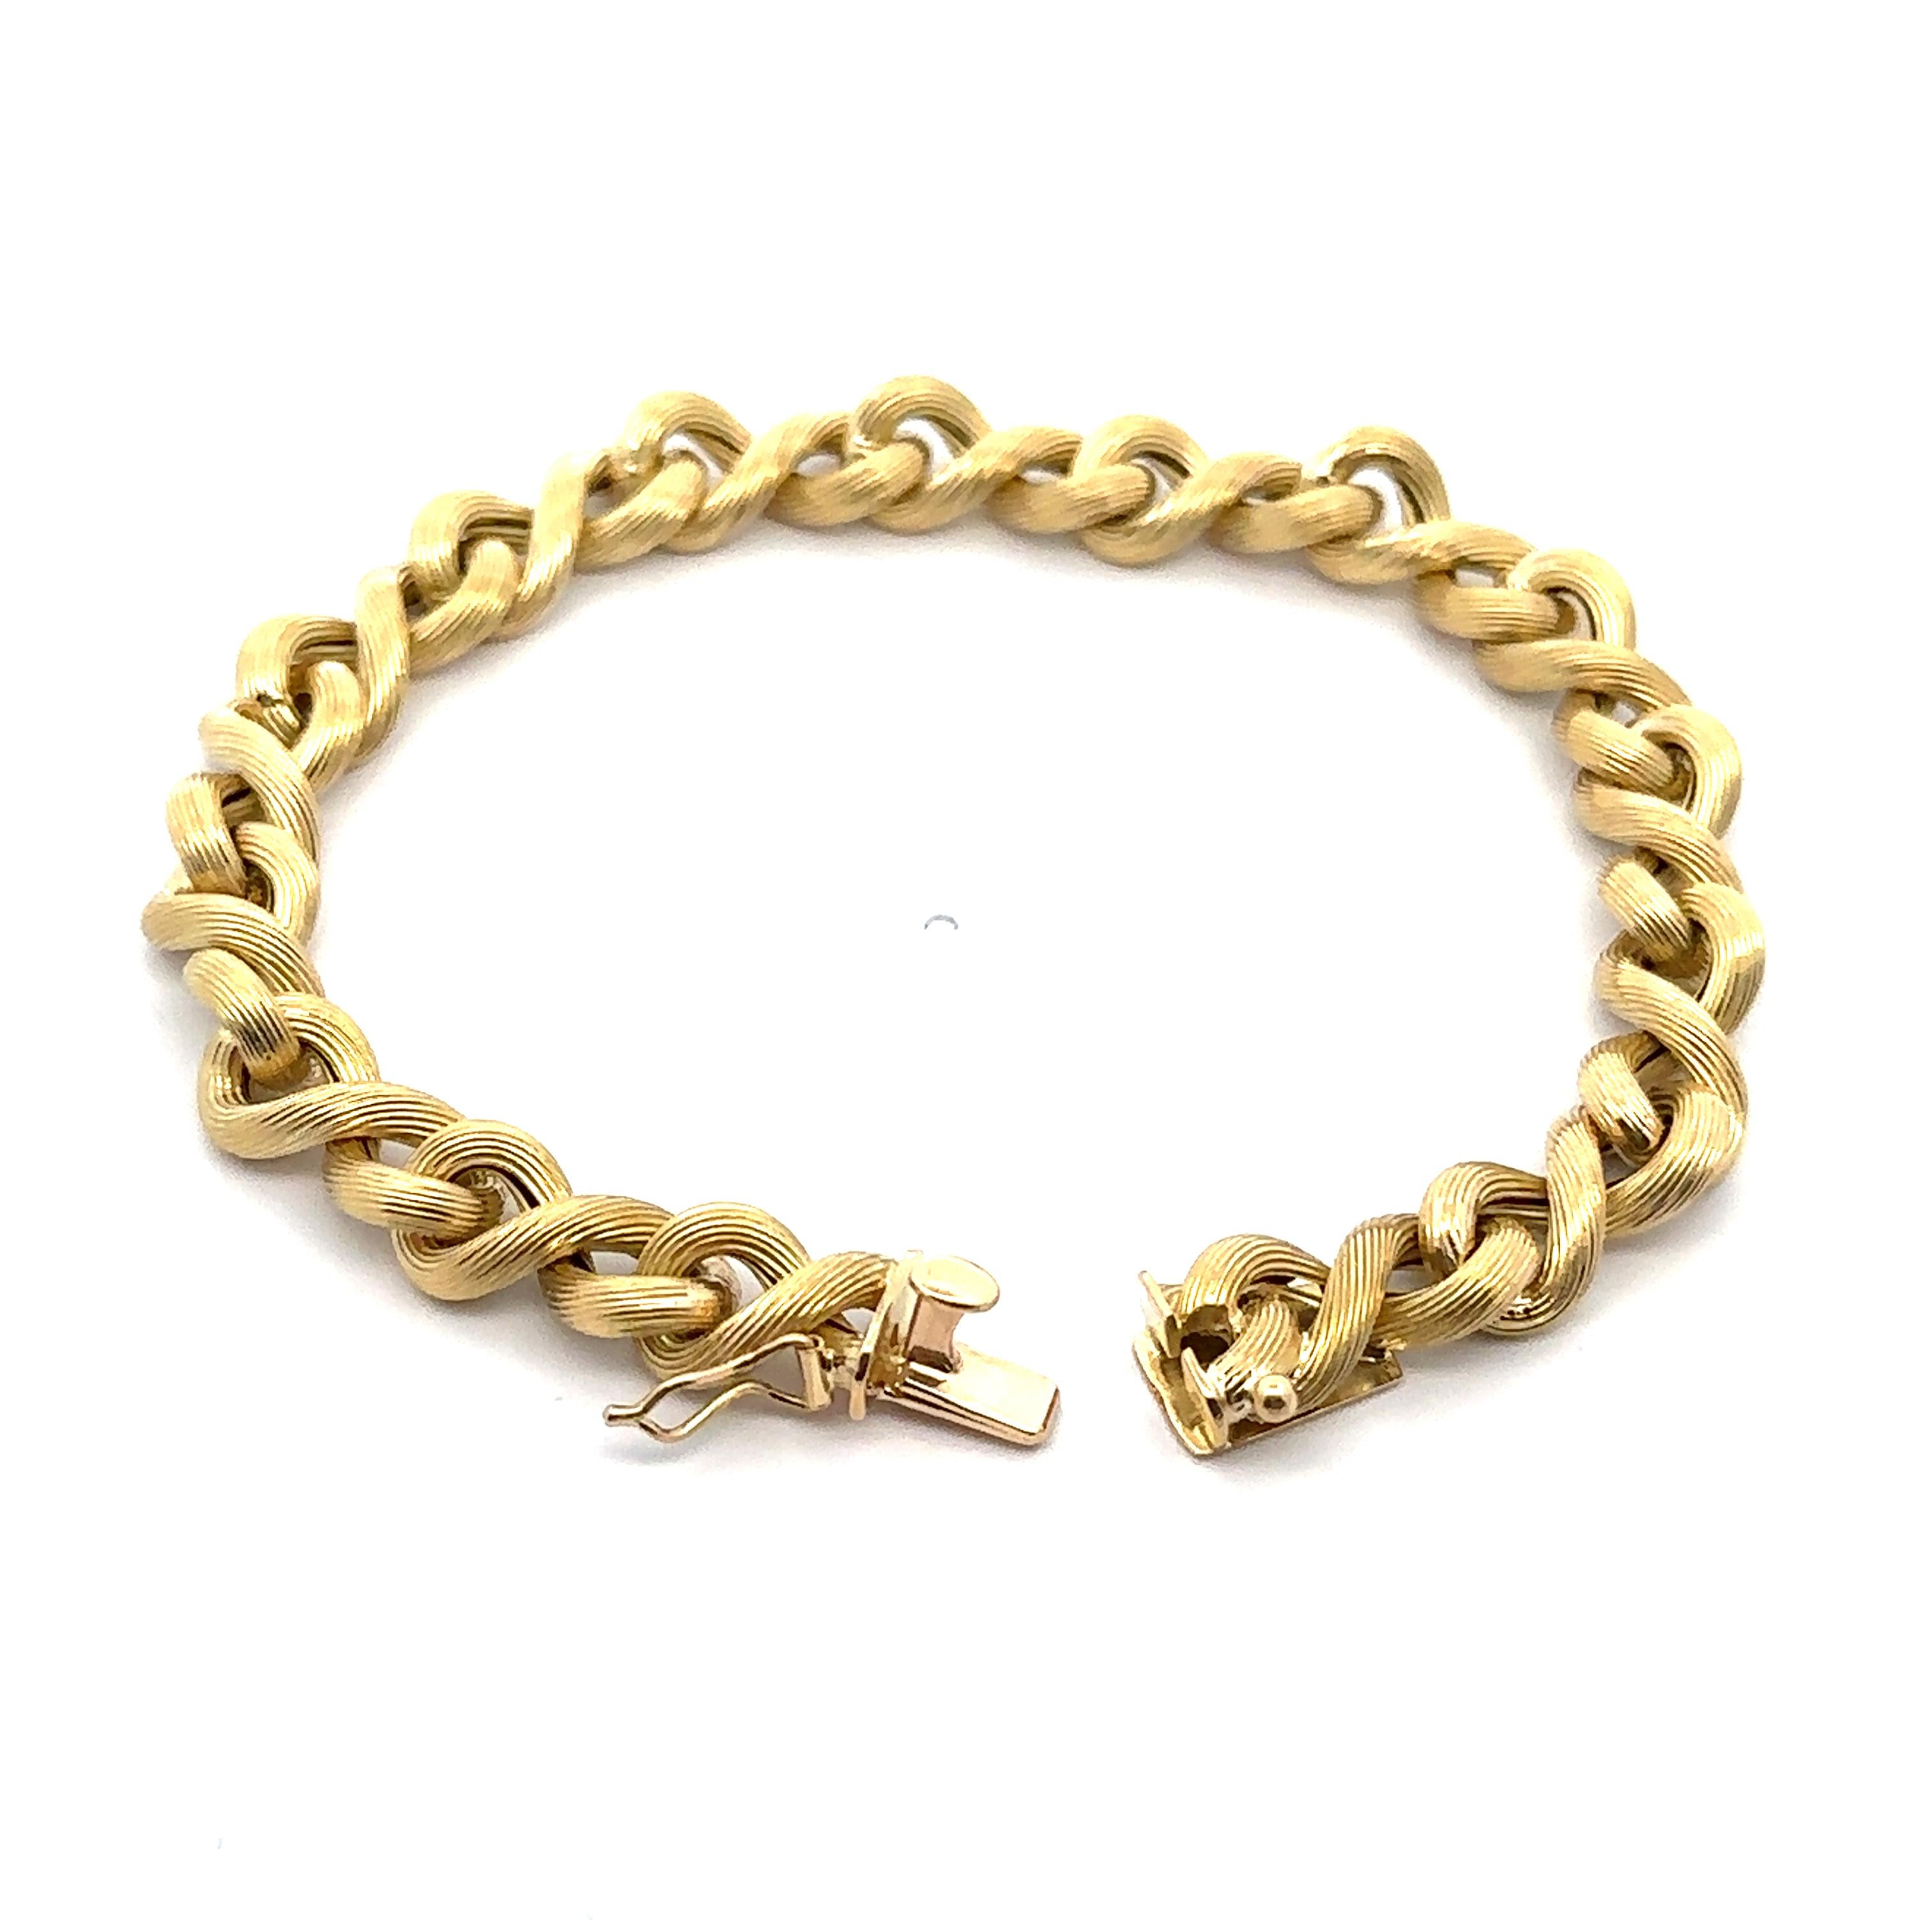 Material: Solid 18k Yellow Gold - Hollow Design
Weight: 14.62 Grams
Chain Type: Infinity/ Figure 8 links
Chain Length: Will comfortably fit up to 7” wrist (fitted on wrist)
Link Width: 7.5mm 
Closure: Push Clasp w/ Safety Latch
Condition: Polished,